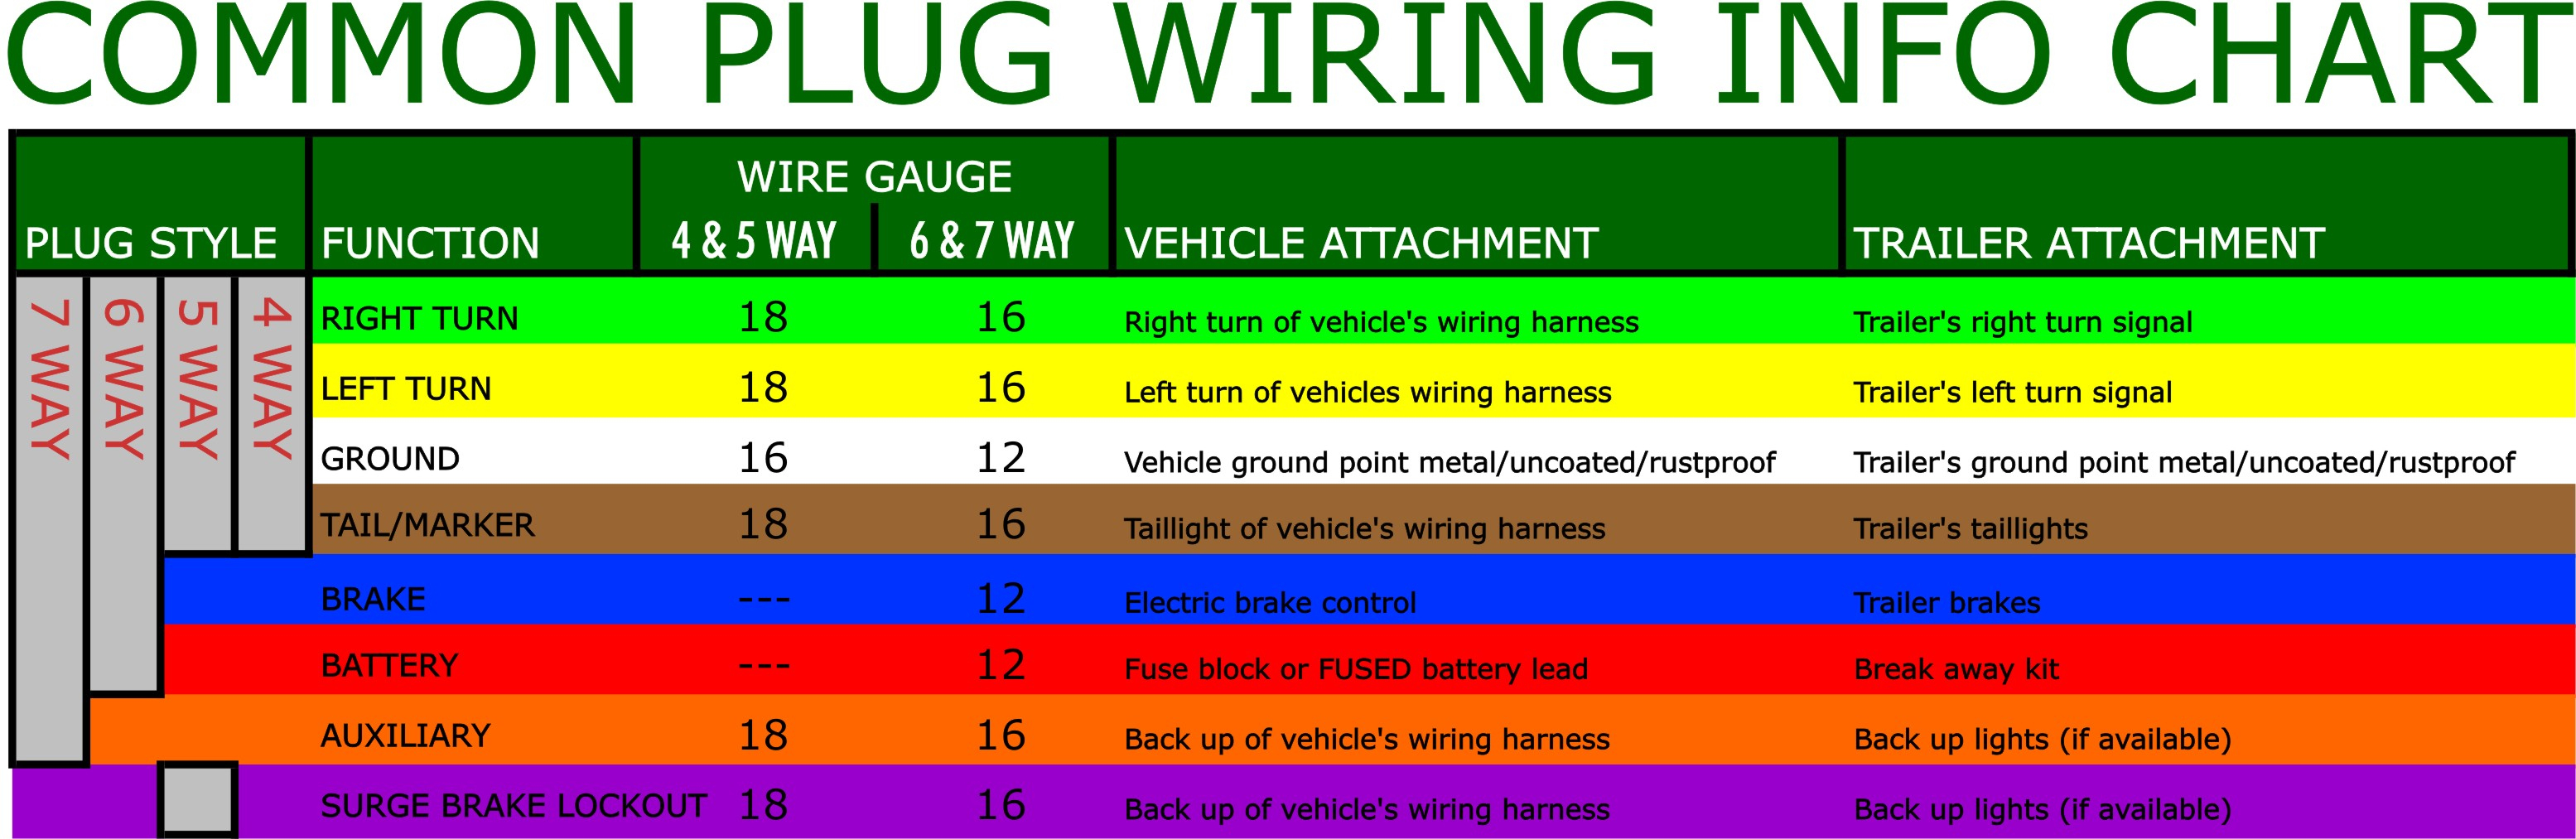 What Are The Most Common Trailer Plugs? - 6 Way Plug Wiring Diagram